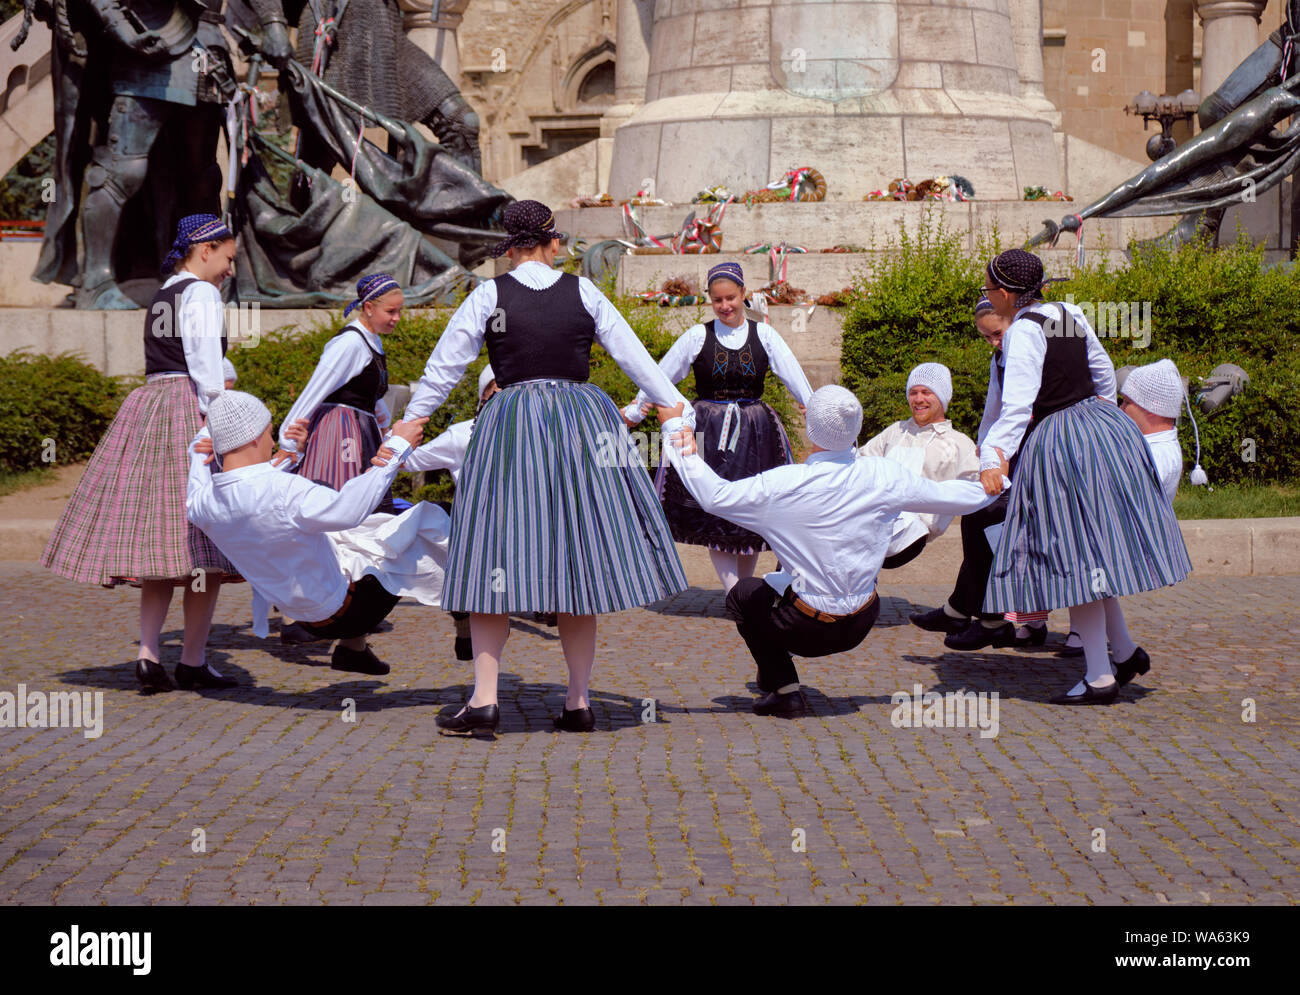 Hungarian Traditional dance troop in folkloric customs with a public performance in square. Dance in circle with man doing crunching dance. Stock Photo